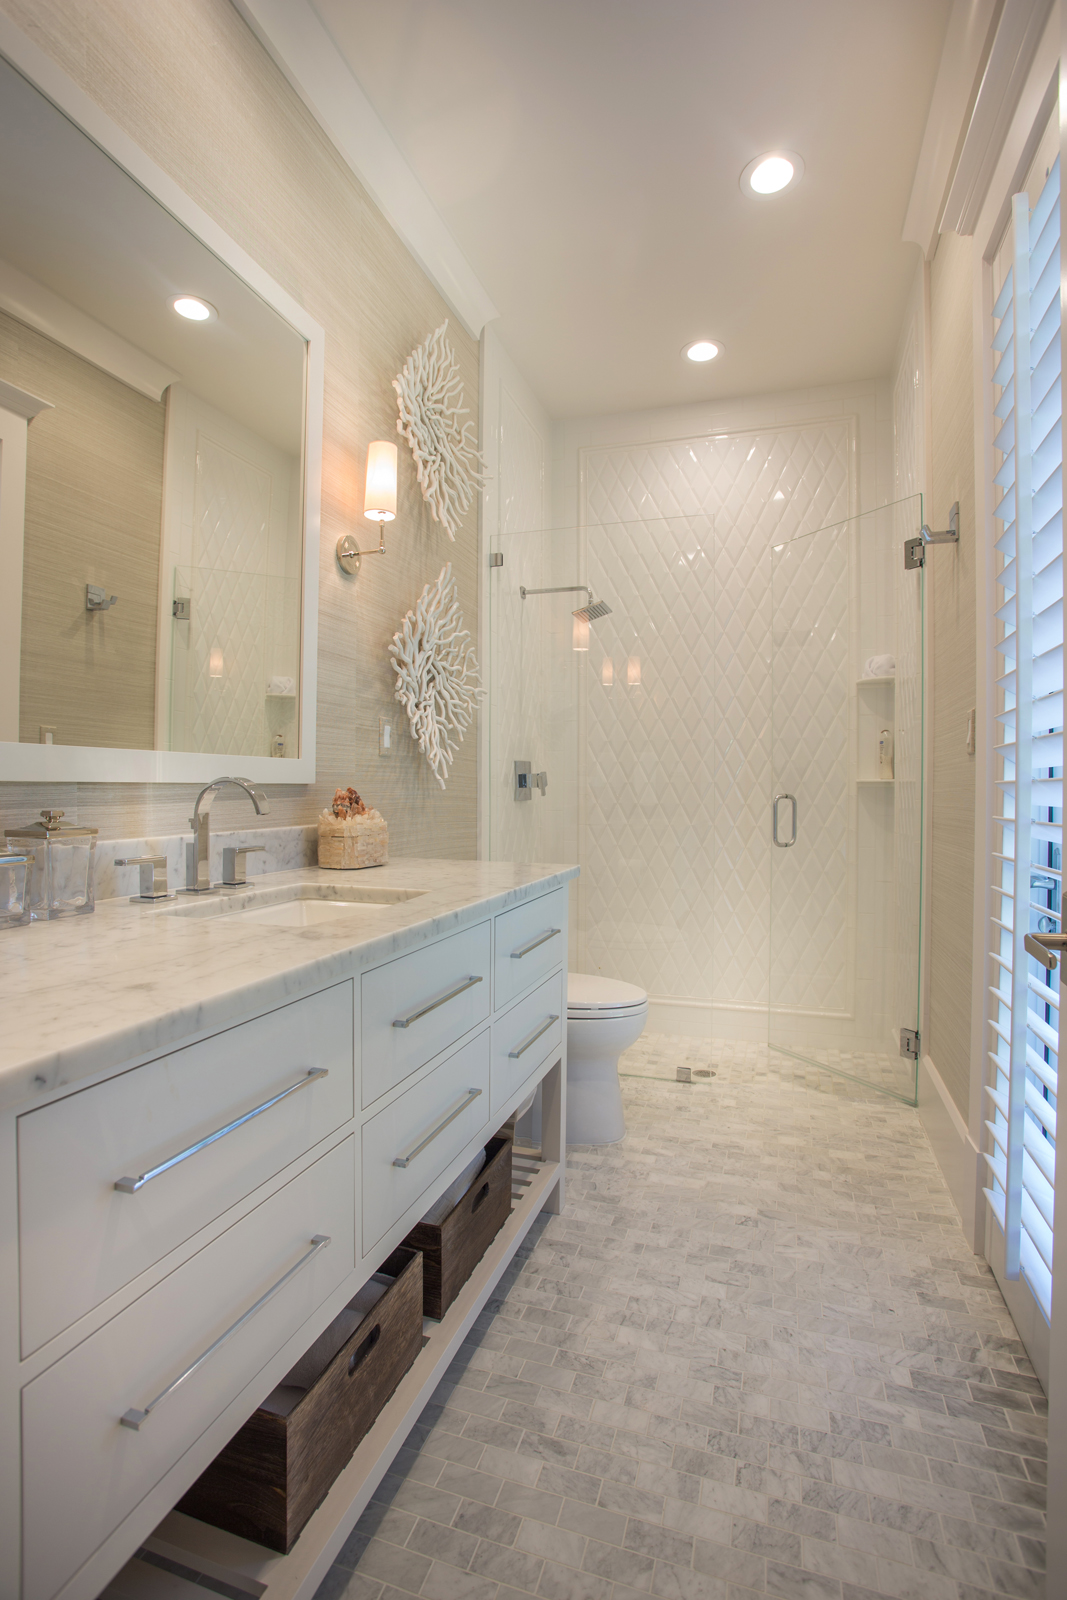 This residential bathroom is the most popular Pineapple House Interior Design image on the Houzz design and renovation platform.